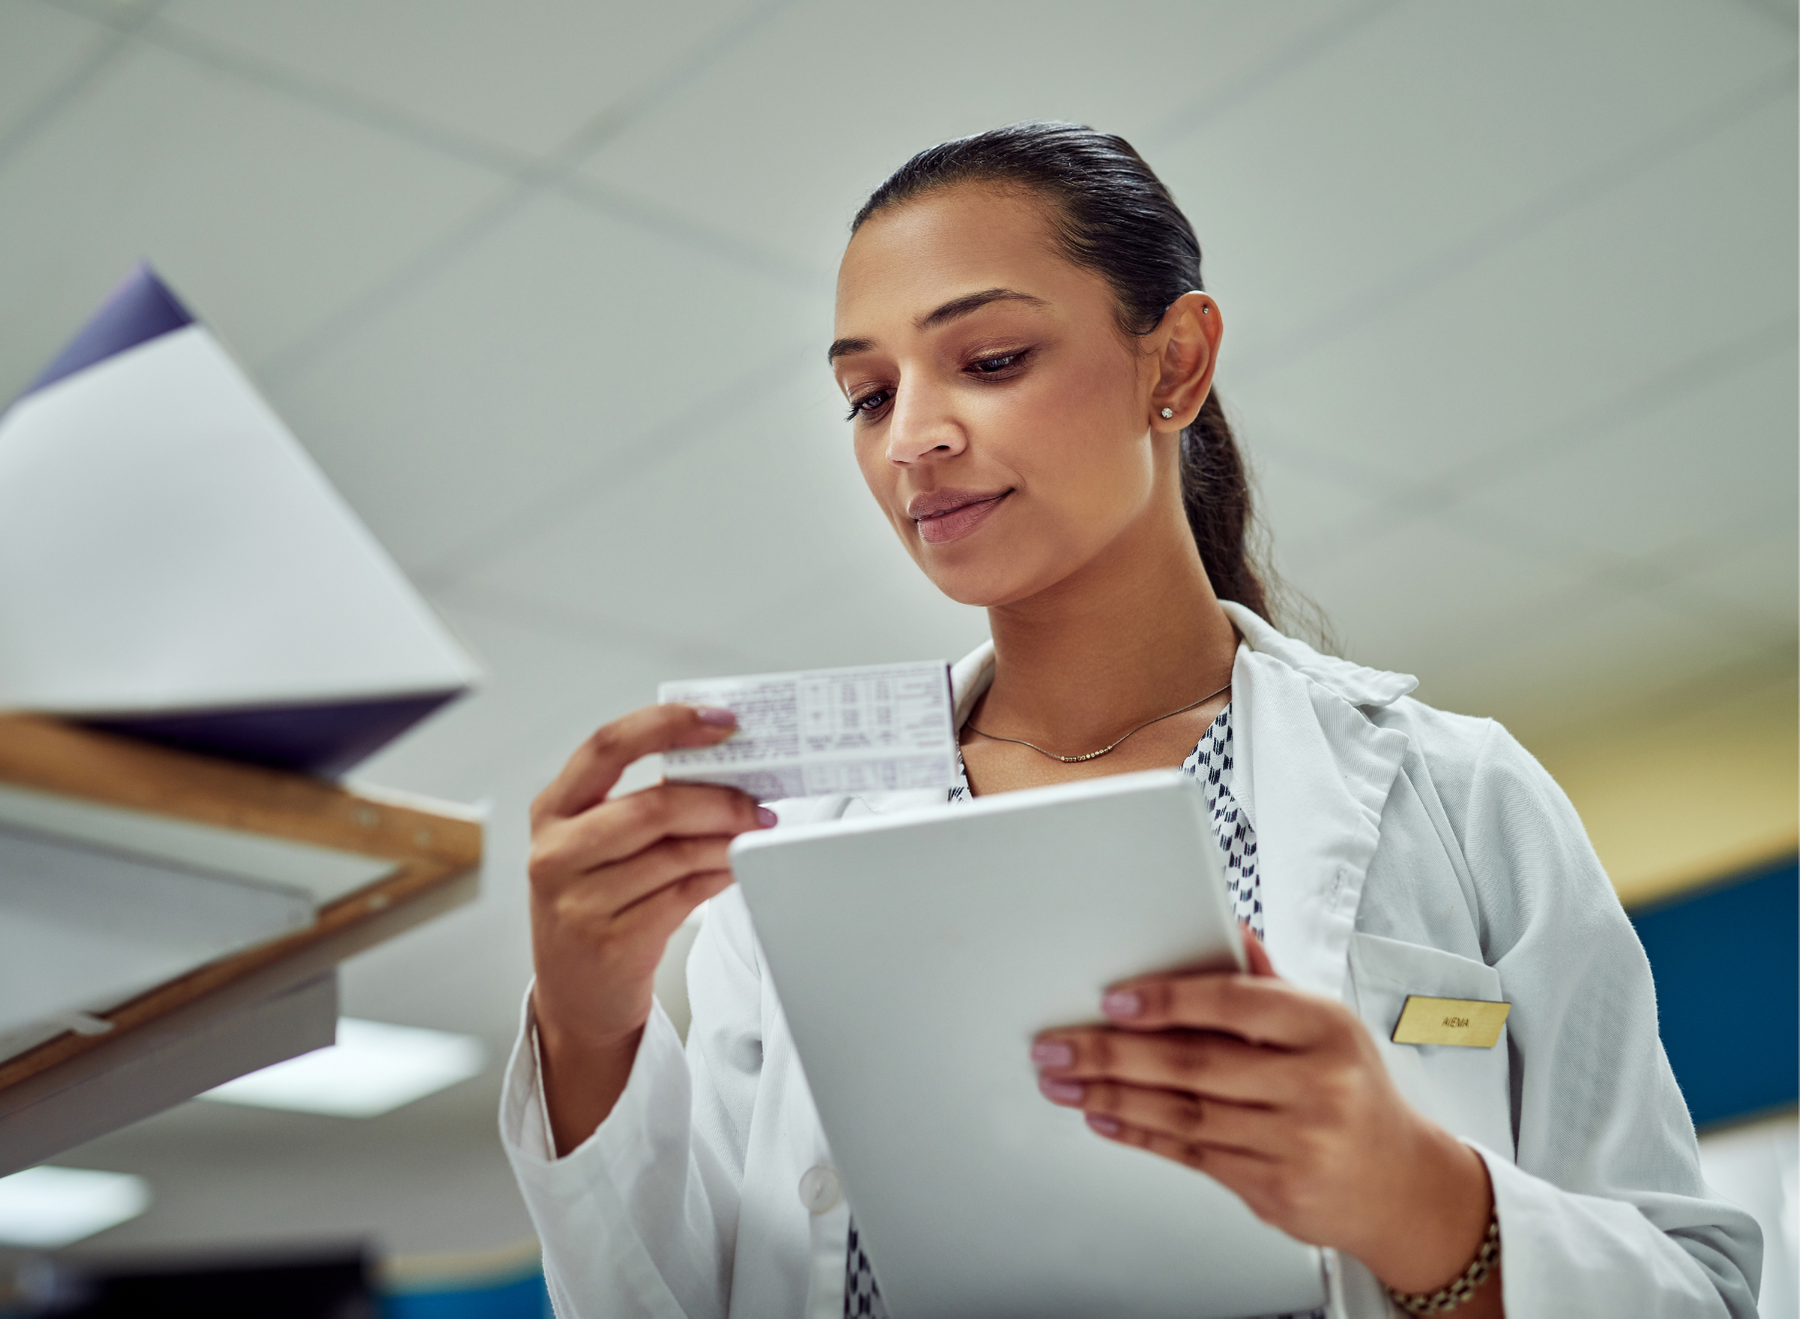 A Guide to HIPAA Compliance in the Pharmacy